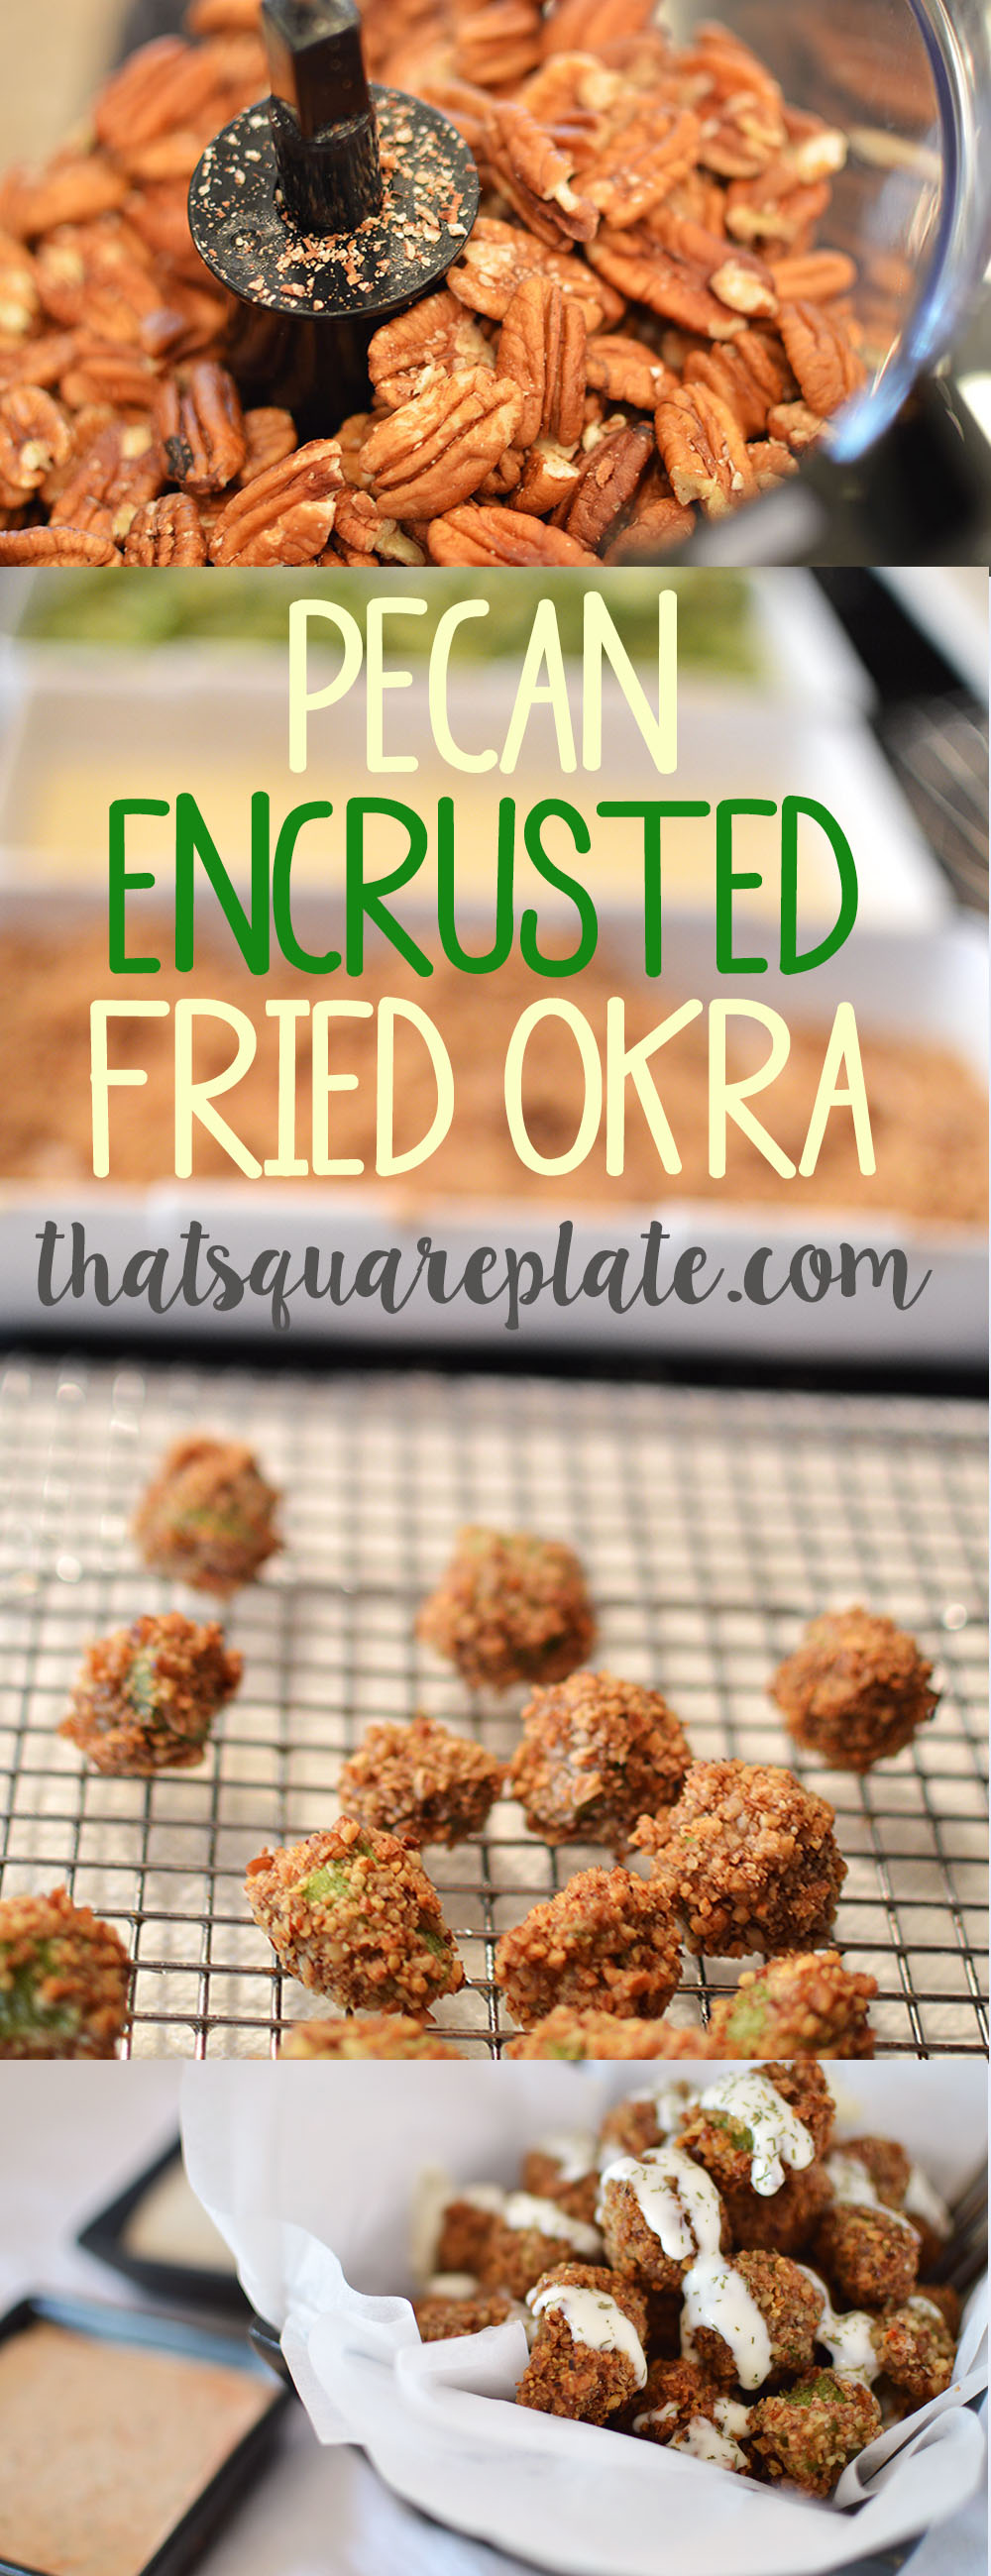 Pecan Encrusted Fried Okra | That Square Plate